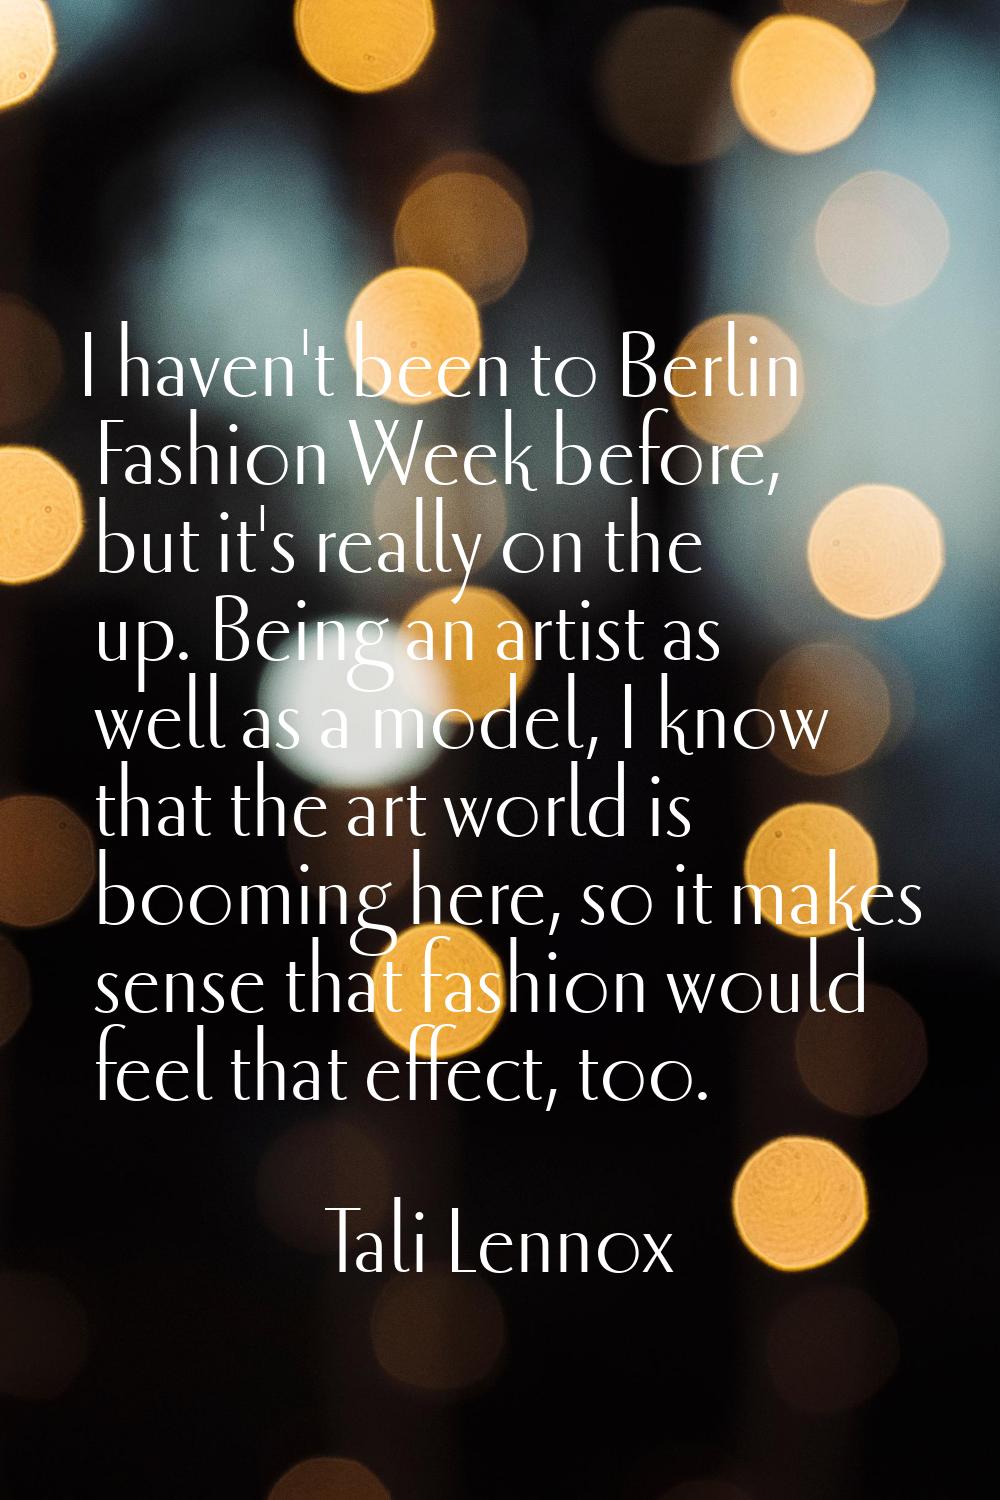 I haven't been to Berlin Fashion Week before, but it's really on the up. Being an artist as well as